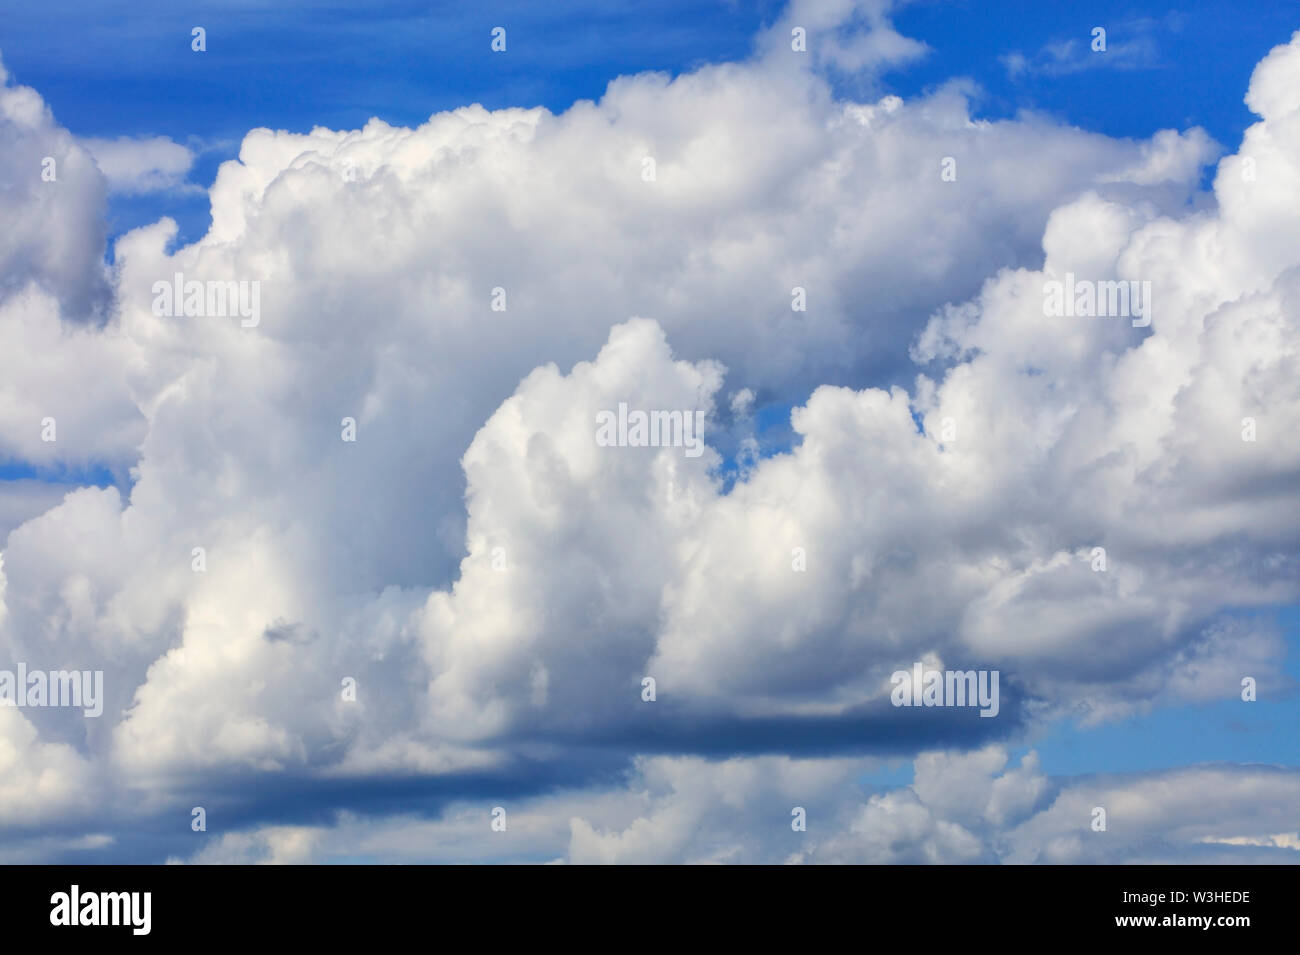 In the blue sky, white-gray fluffy clouds gradually come together before the rain. Stock Photo